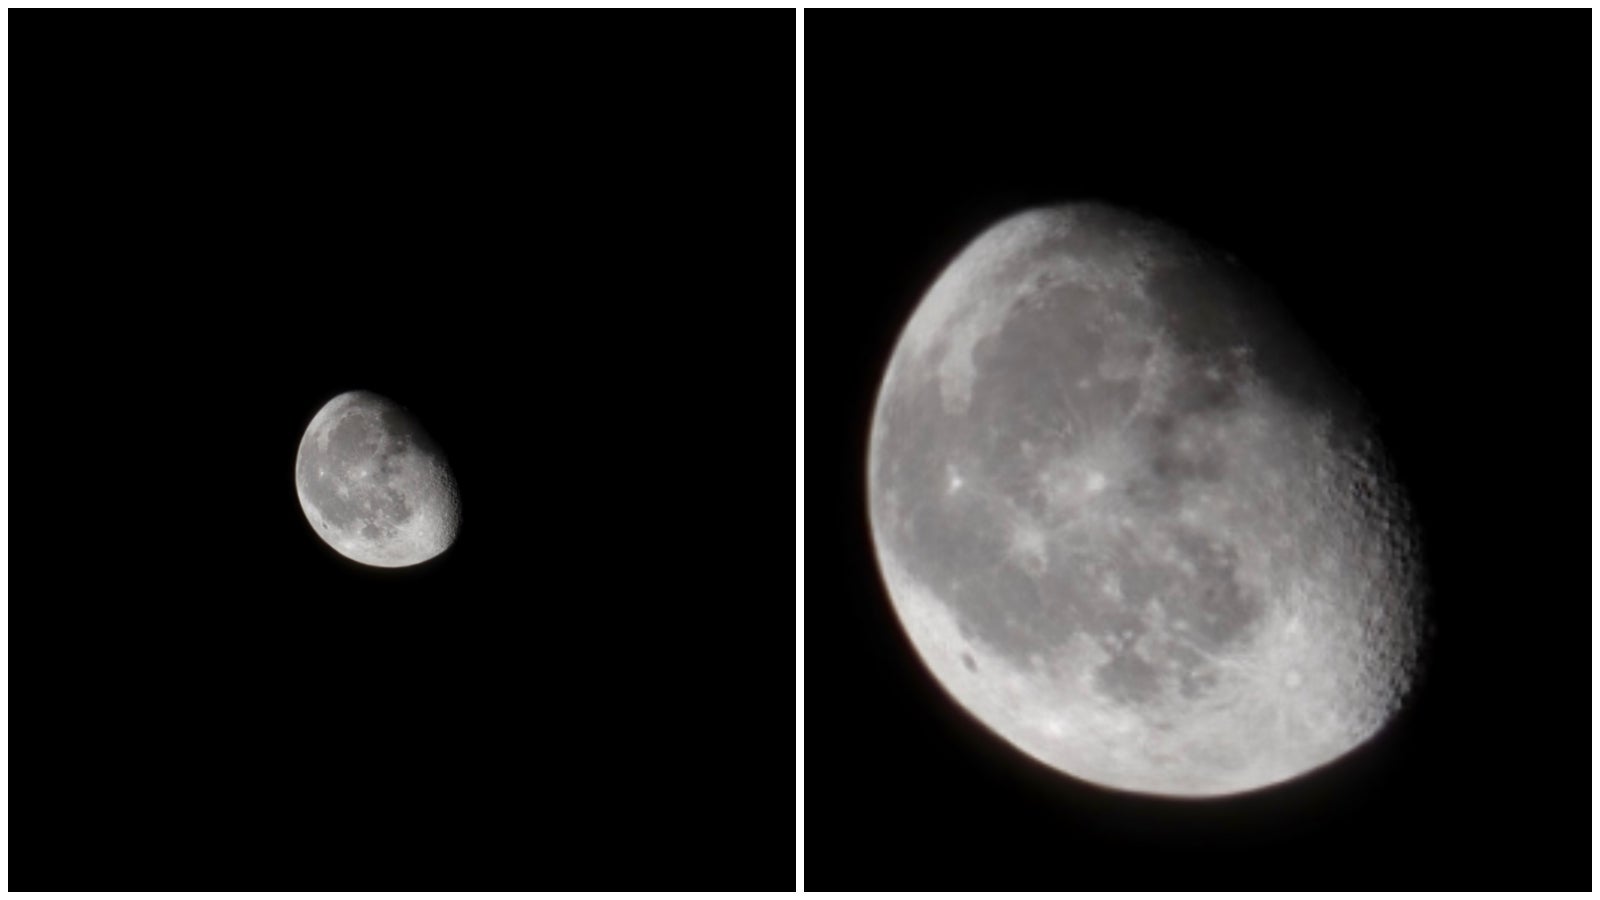 My Galaxy S23 Ultra took these at 30 and 100x zoom. But are they photos of enhanced images? Does it matter to you? - Concluded: Samsung phones take “artificial” moon photos but Samsung has nothing to apologize for